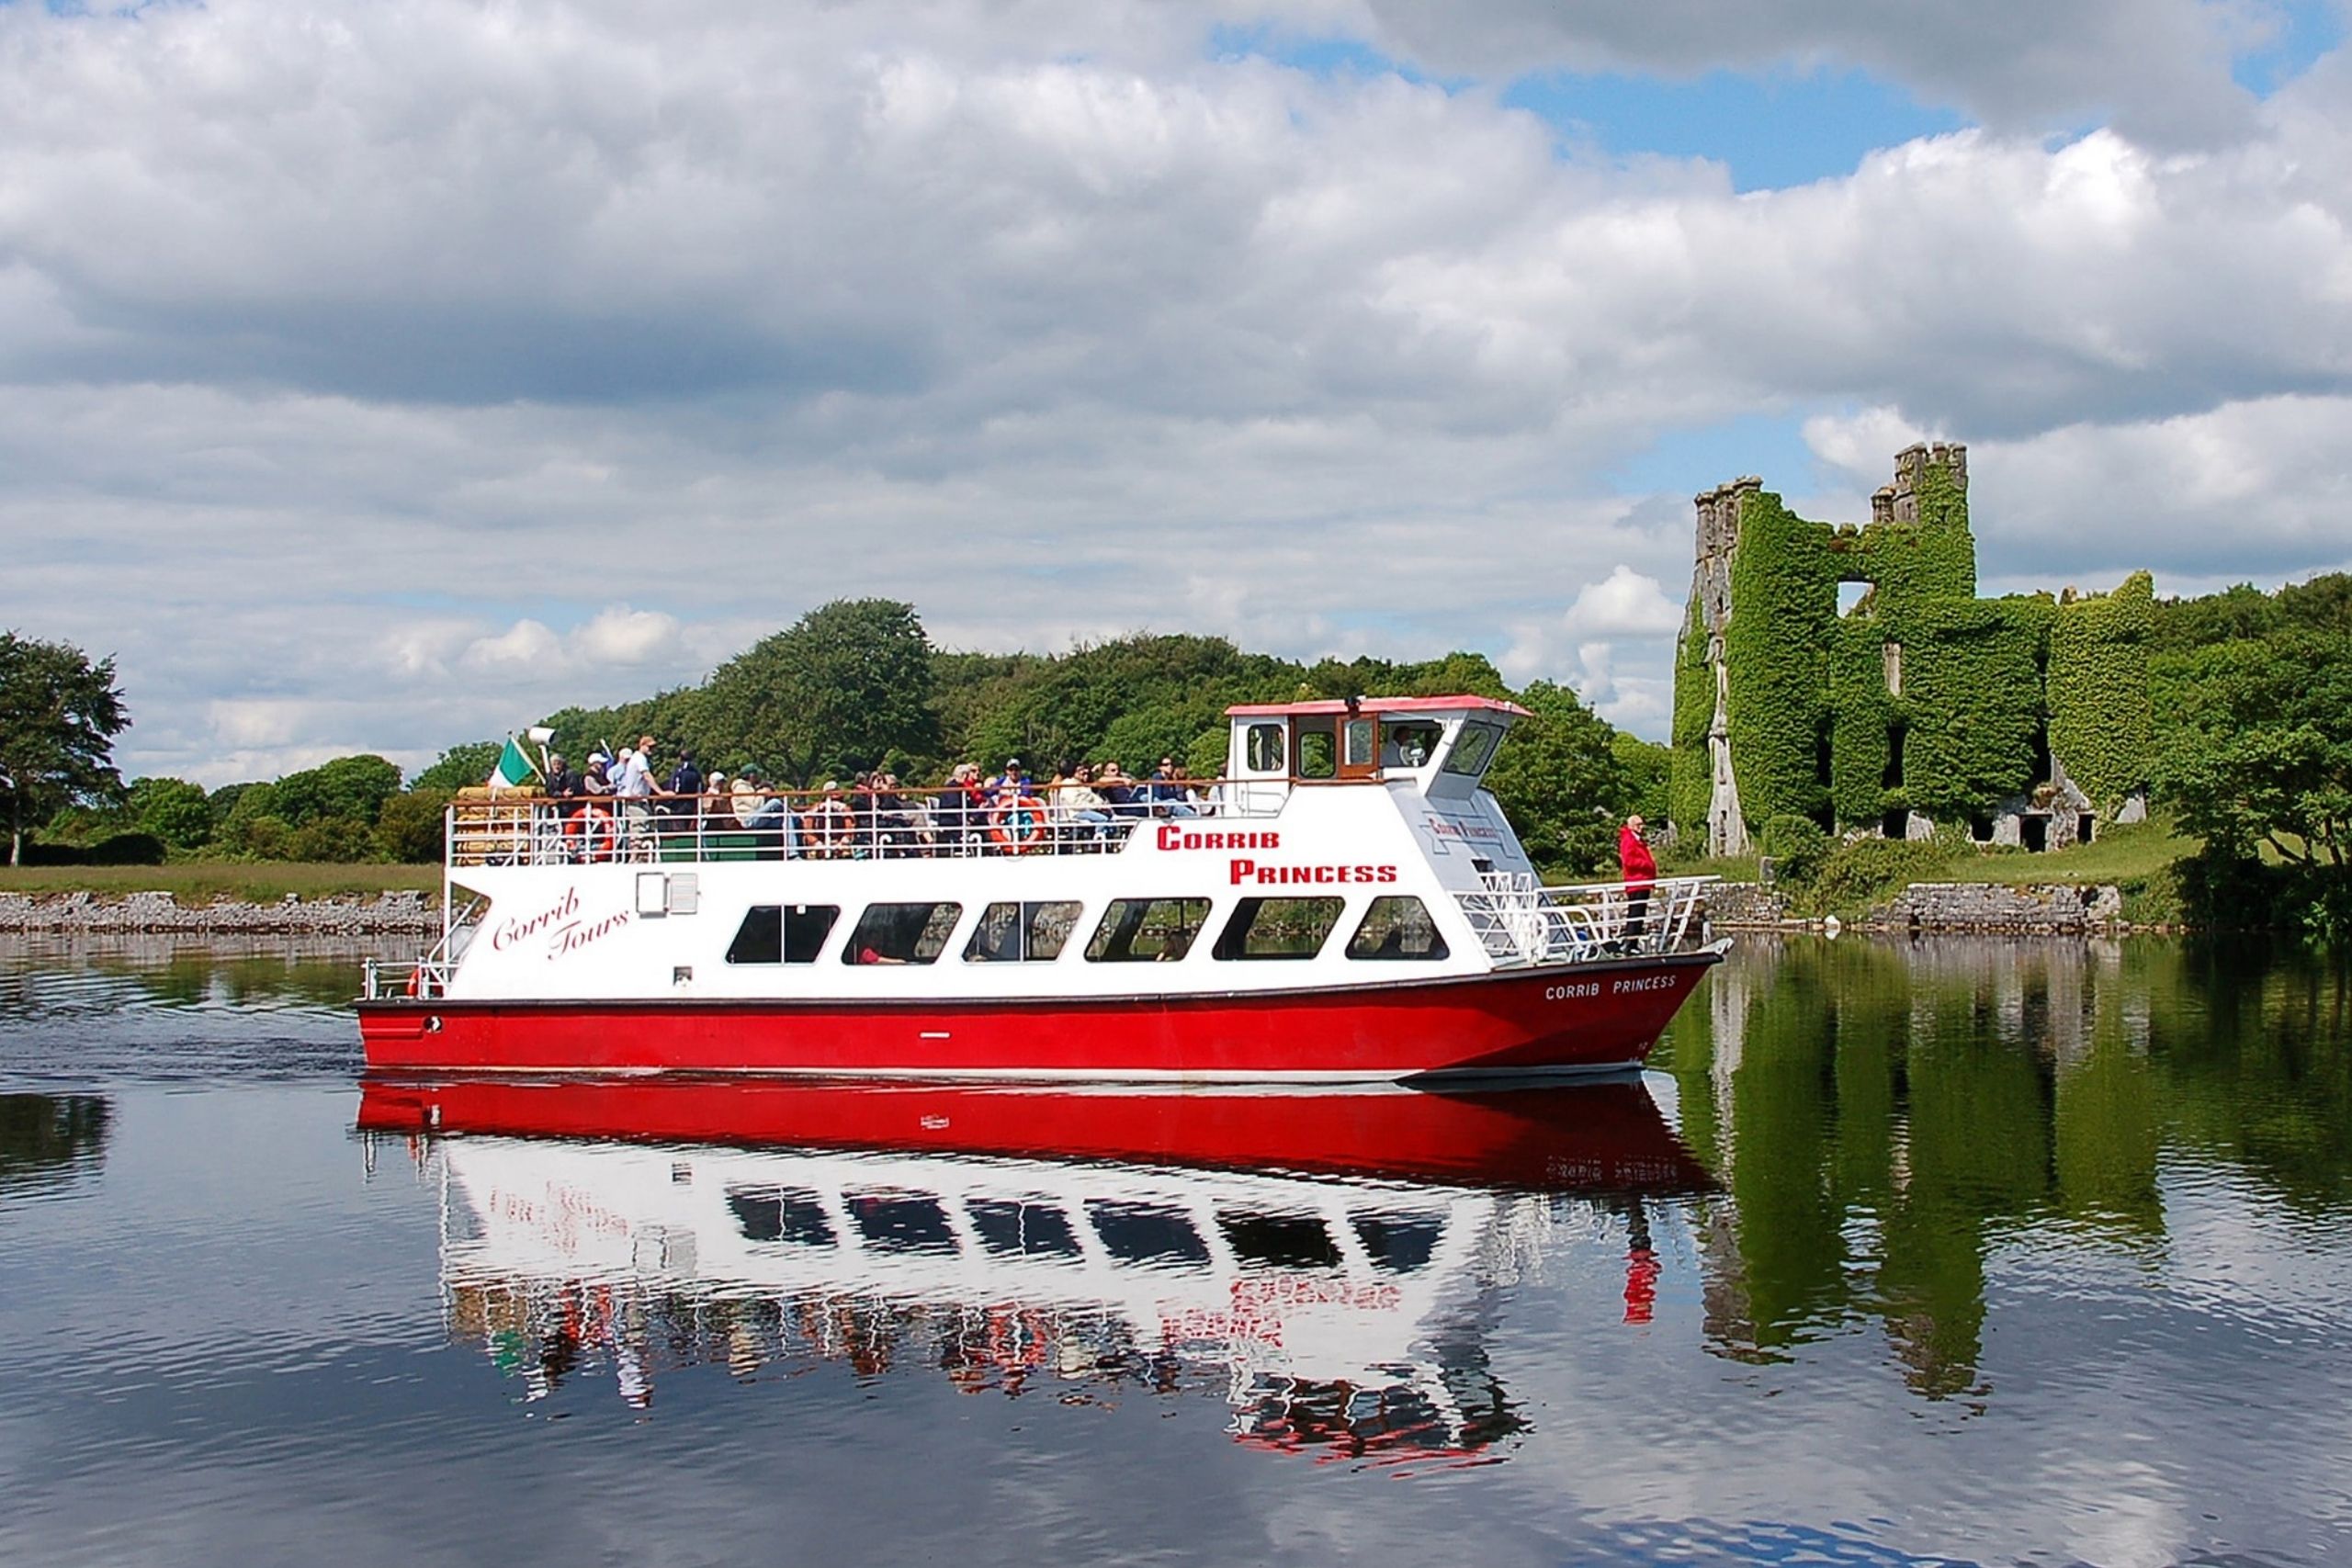 Enjoying a River Cruise on the Corrib Princess is One of the Top Things to Do in Galway